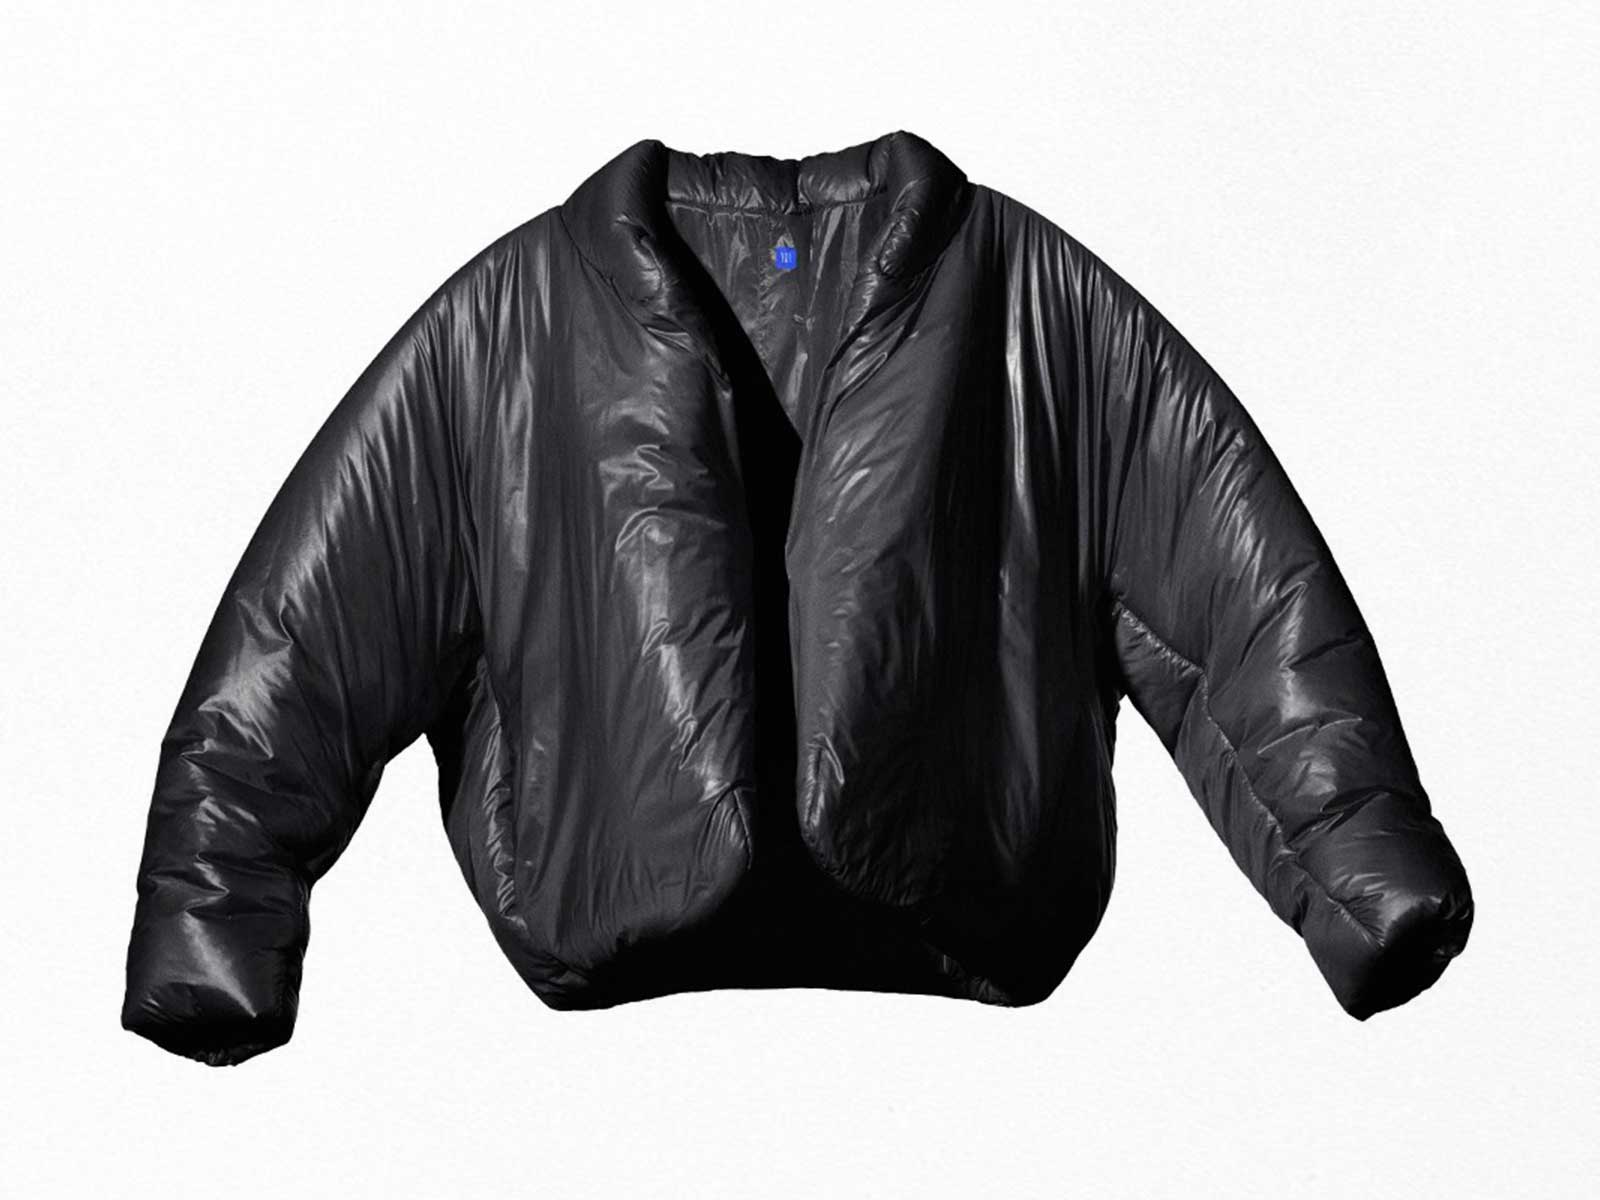 YEEZY gives a second chance to get the Round Jacket